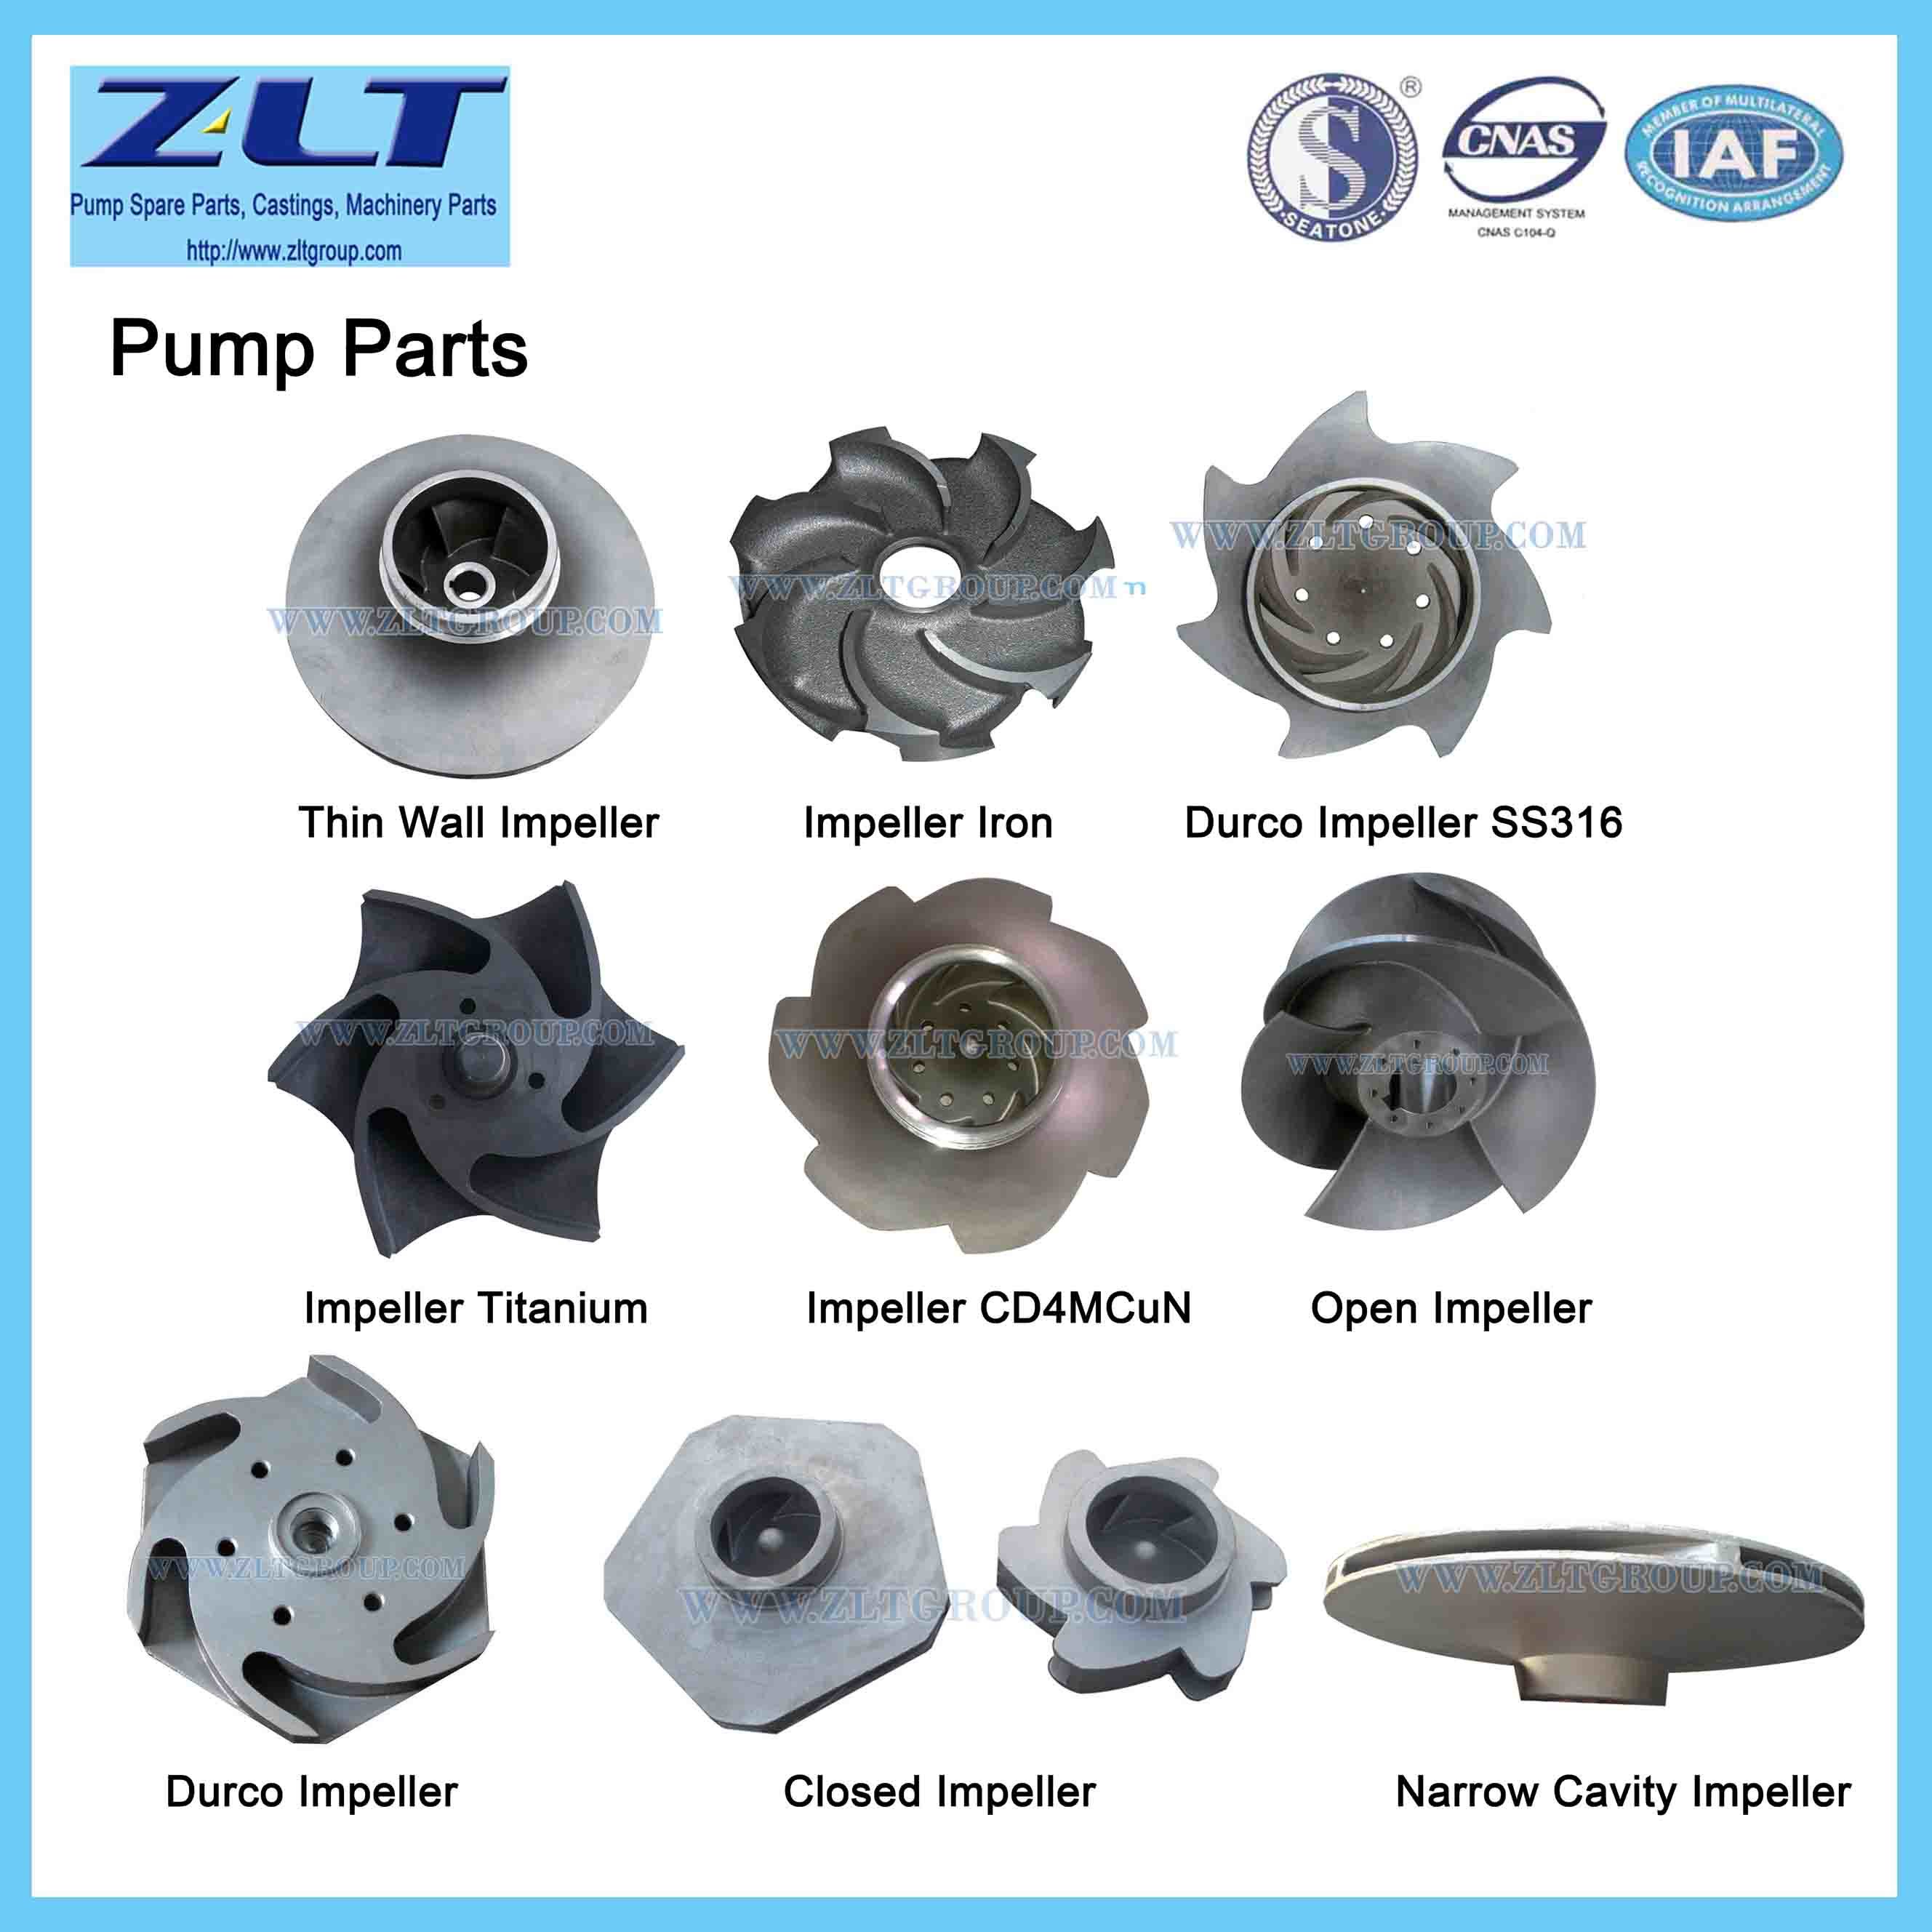 Distribute ANSI New & Used Pump Parts